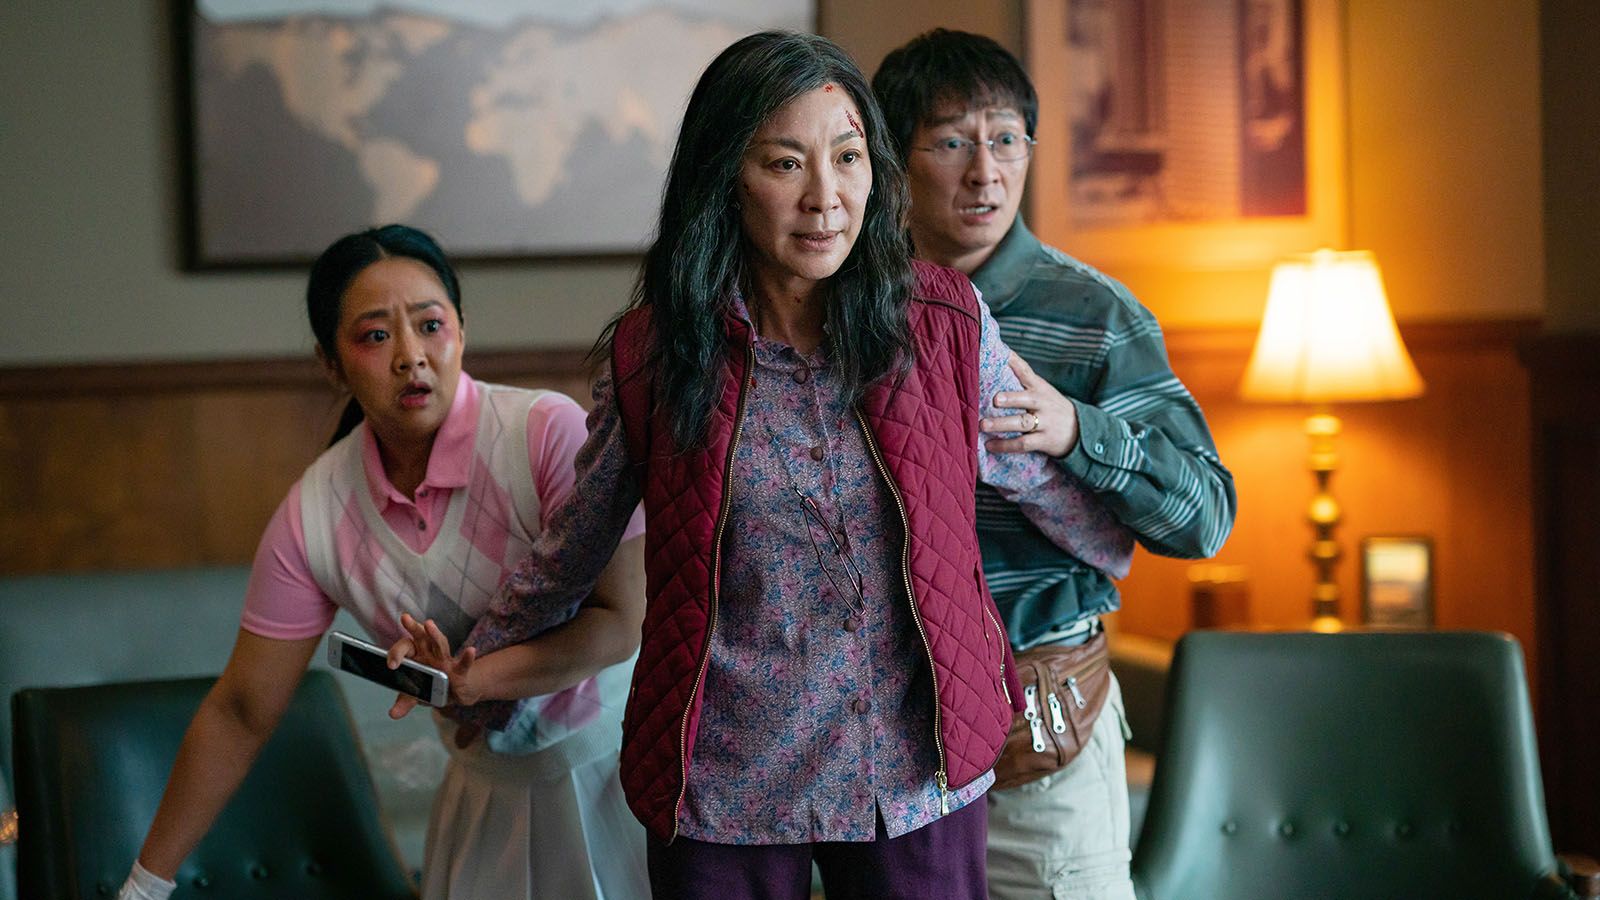 Everything Everywhere All at Once, starring, from left, Stephanie Hsu, Michelle Yeoh, and Ke Huy Quan, took home seven Oscars. Among the wins were Yeoh for Actress in a Leading Role and Quan for Actor in a Supporting Role.